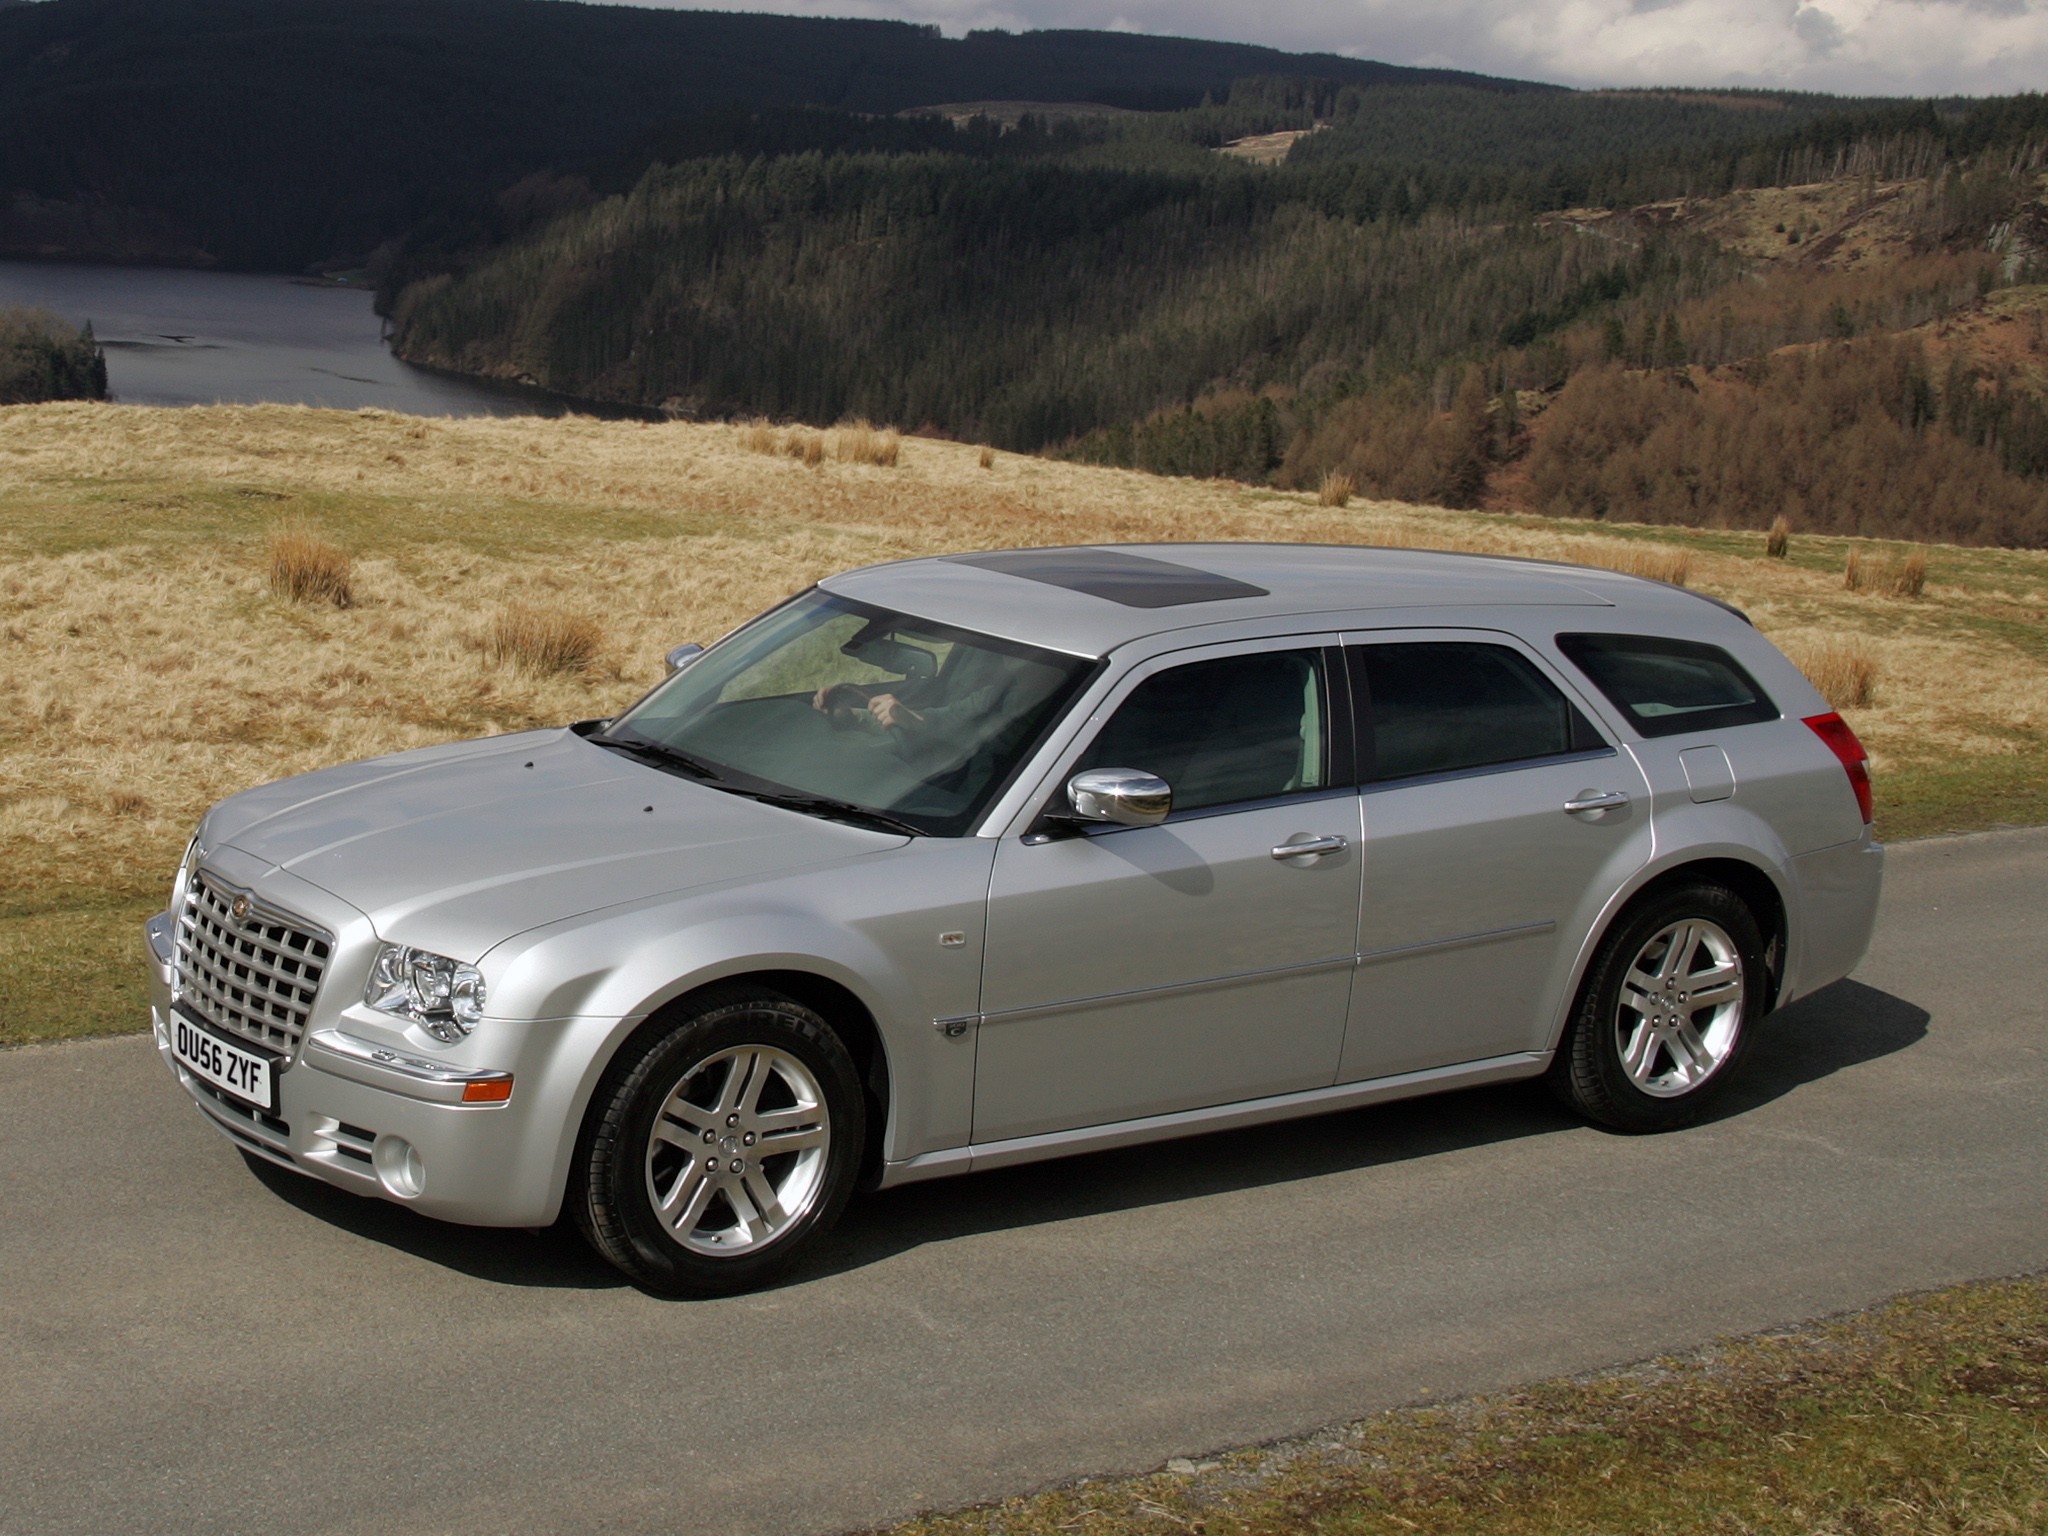 2009 Chrysler 300C Touring Concept - Car Pictures